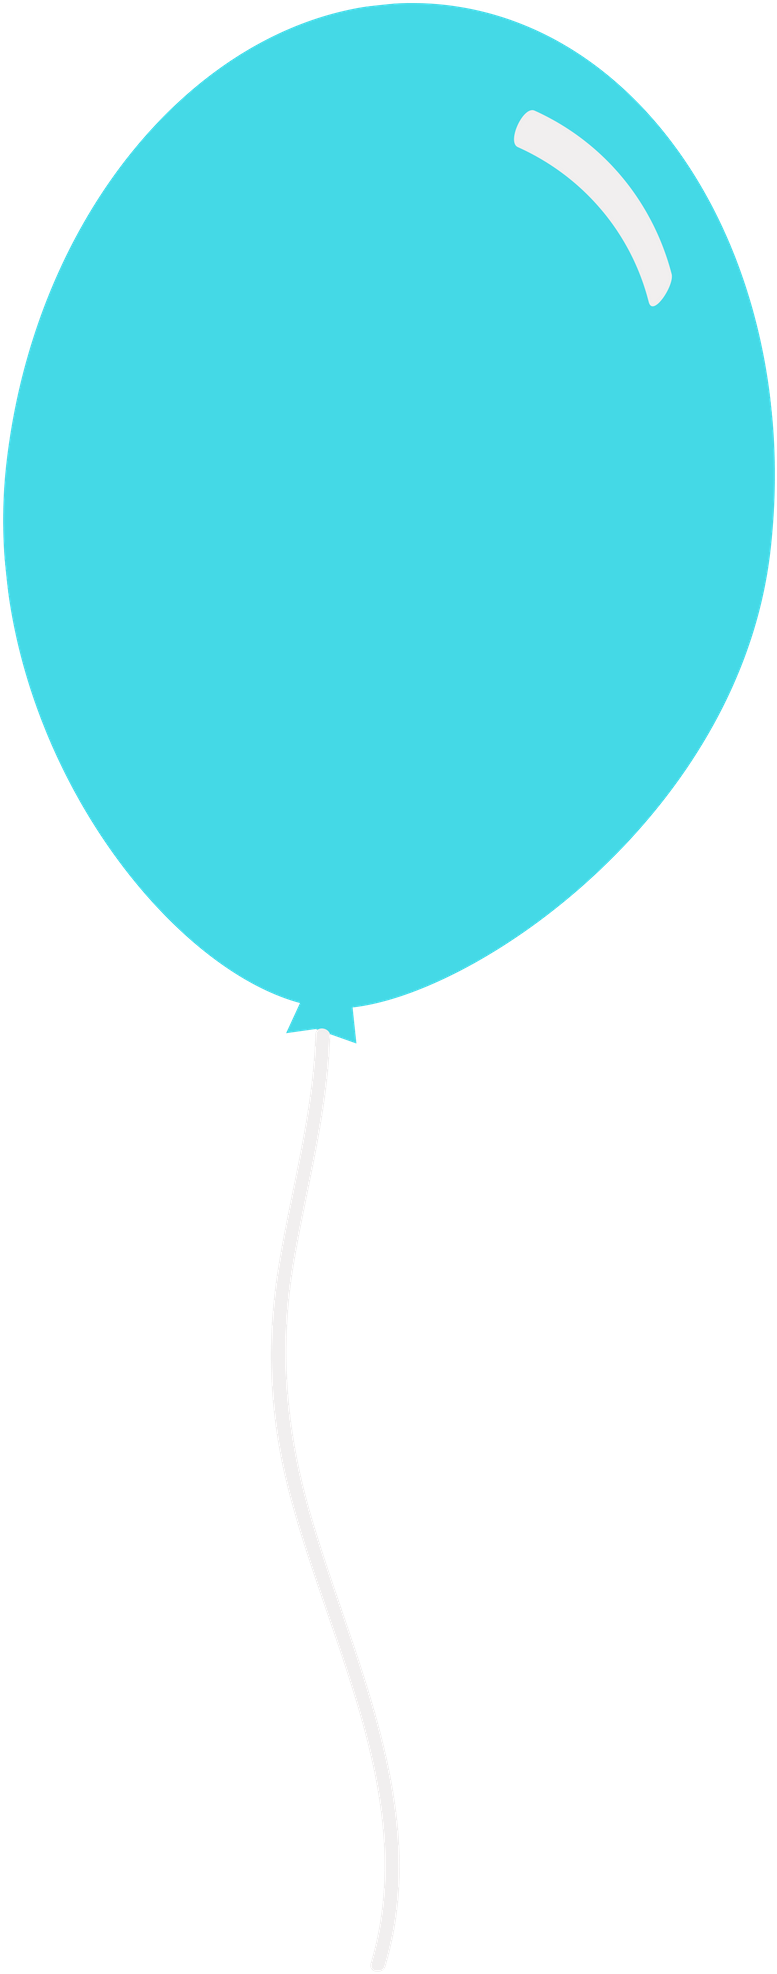 Download A Blue Balloon With A String [100% Free] - FastPNG